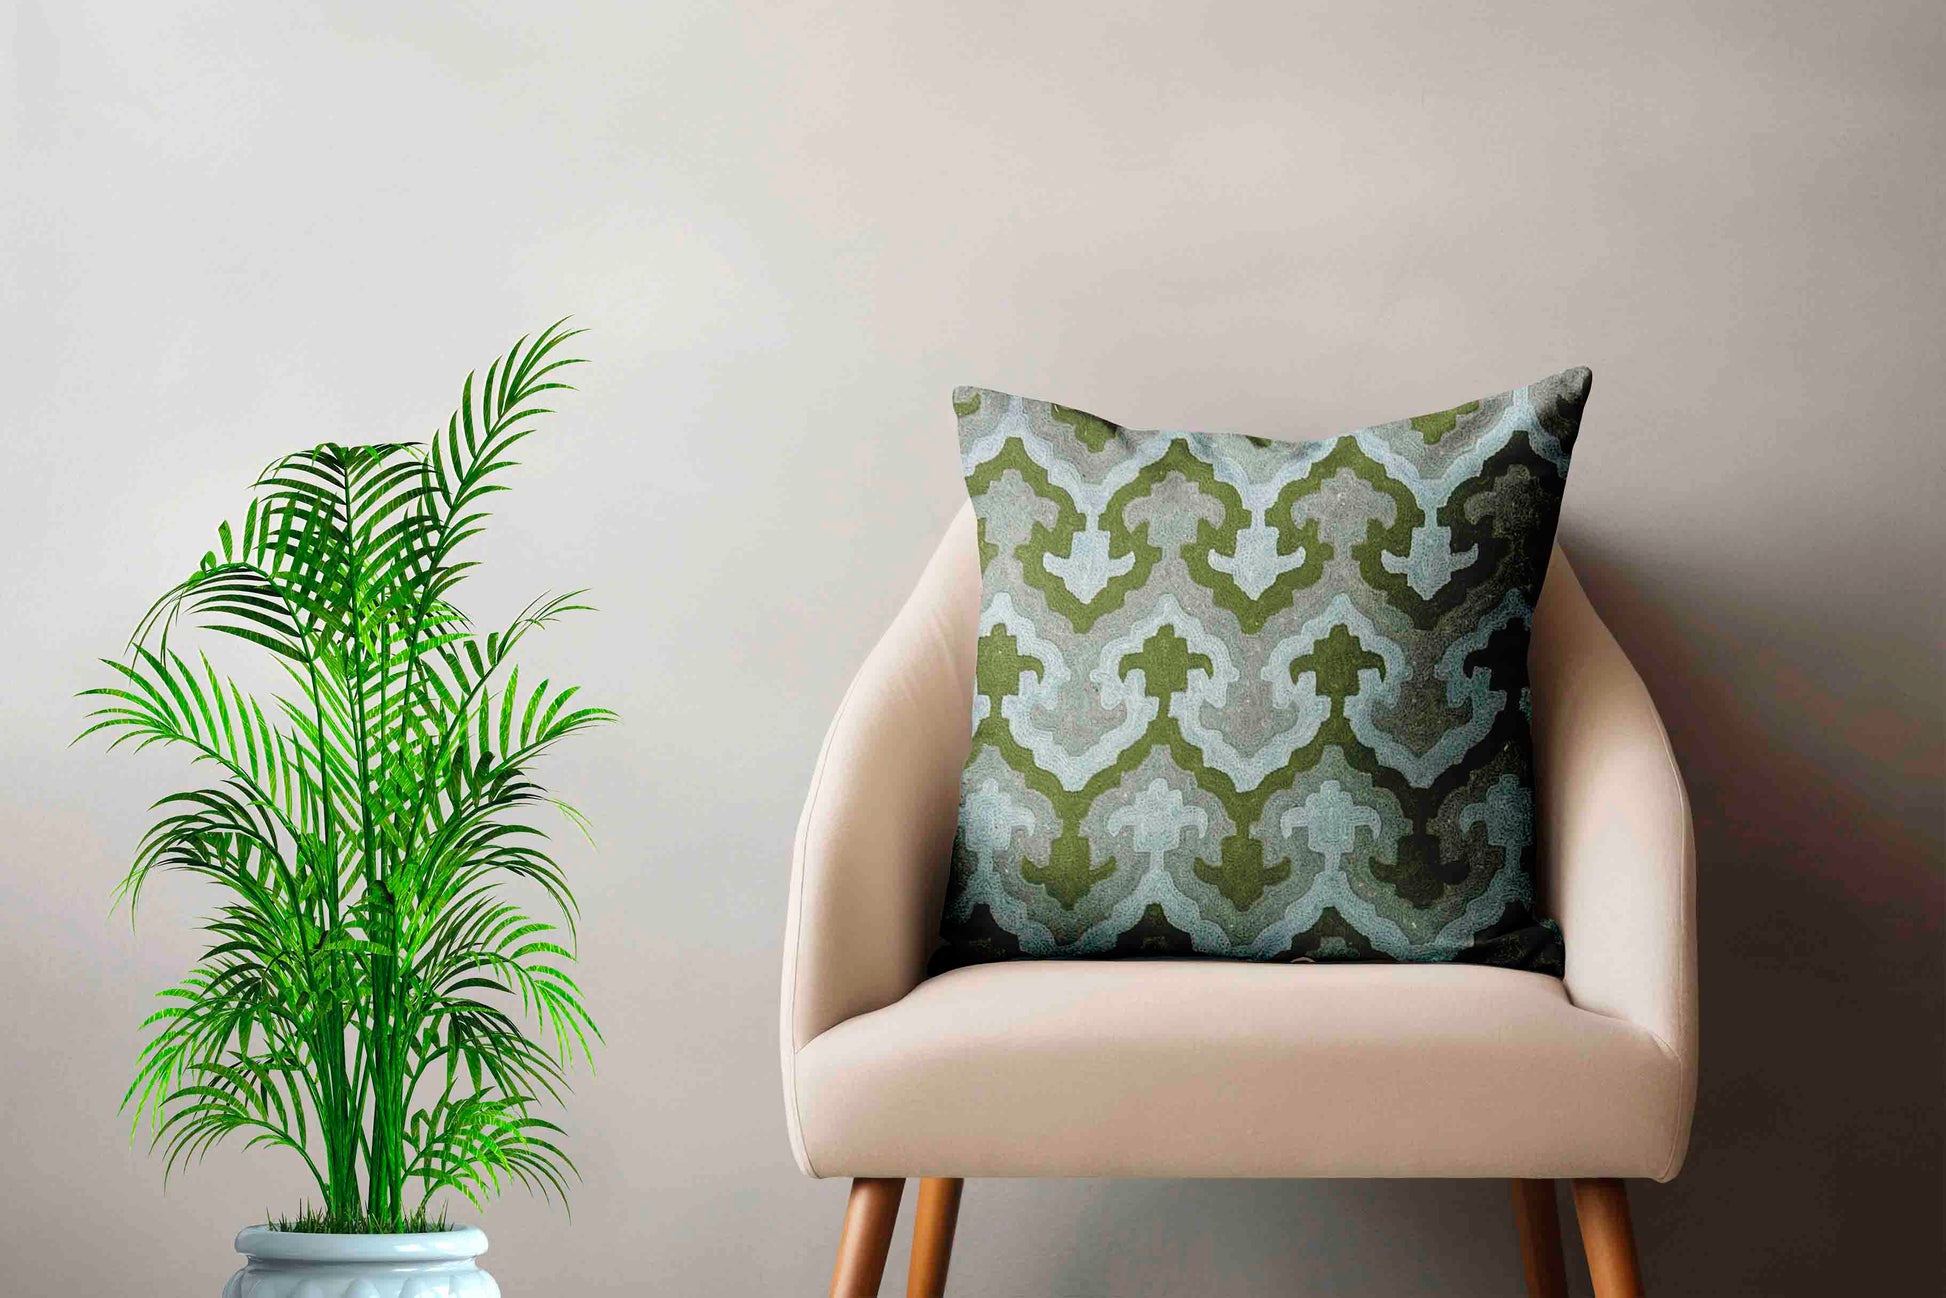 Luxury cushion cover Geometric print art muted blue and green handmade home decor hand embroidery